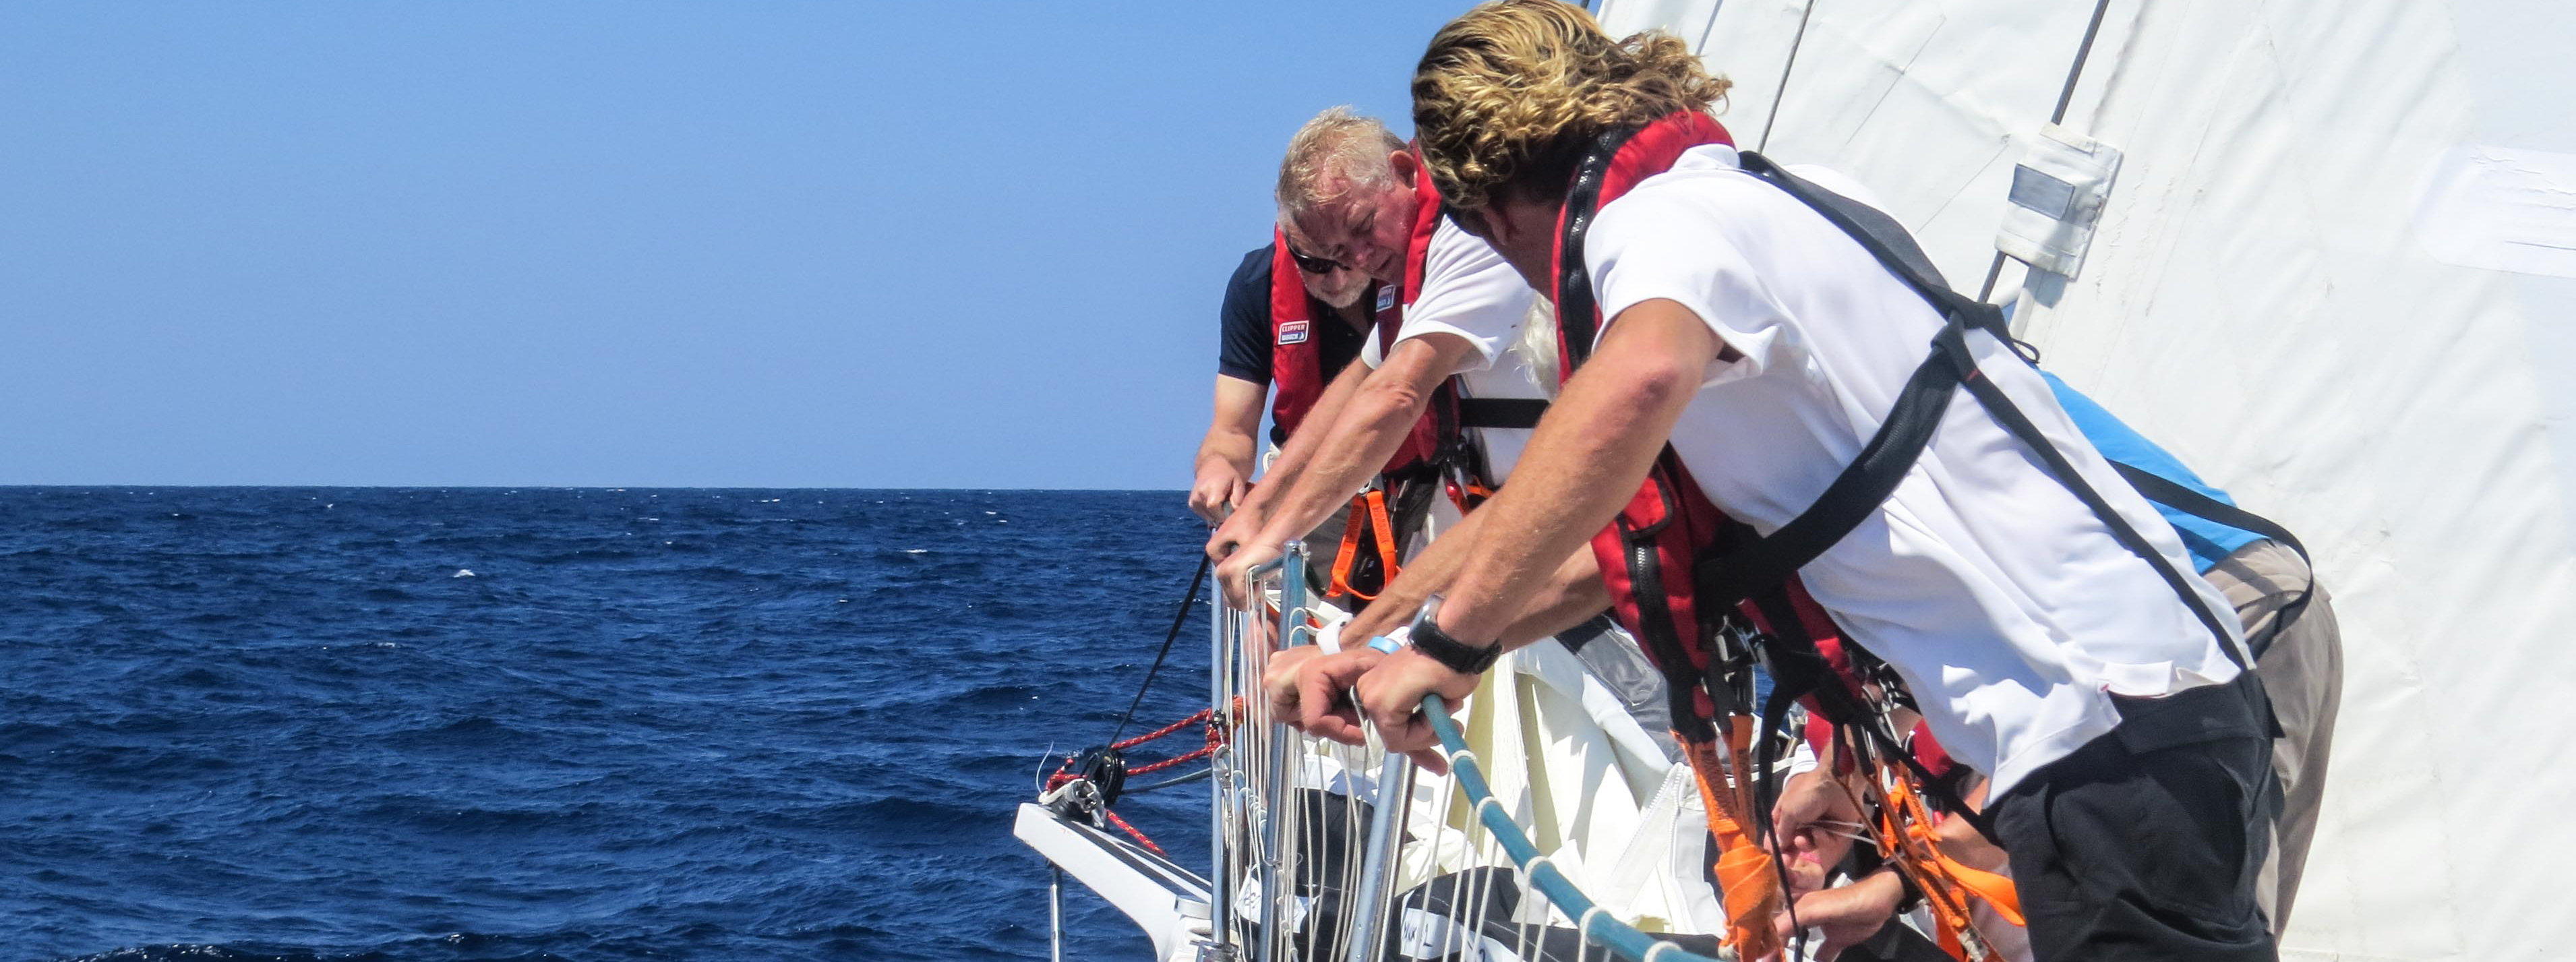 ​Race 1 Day 21: Mixed fortunes across the fleet 